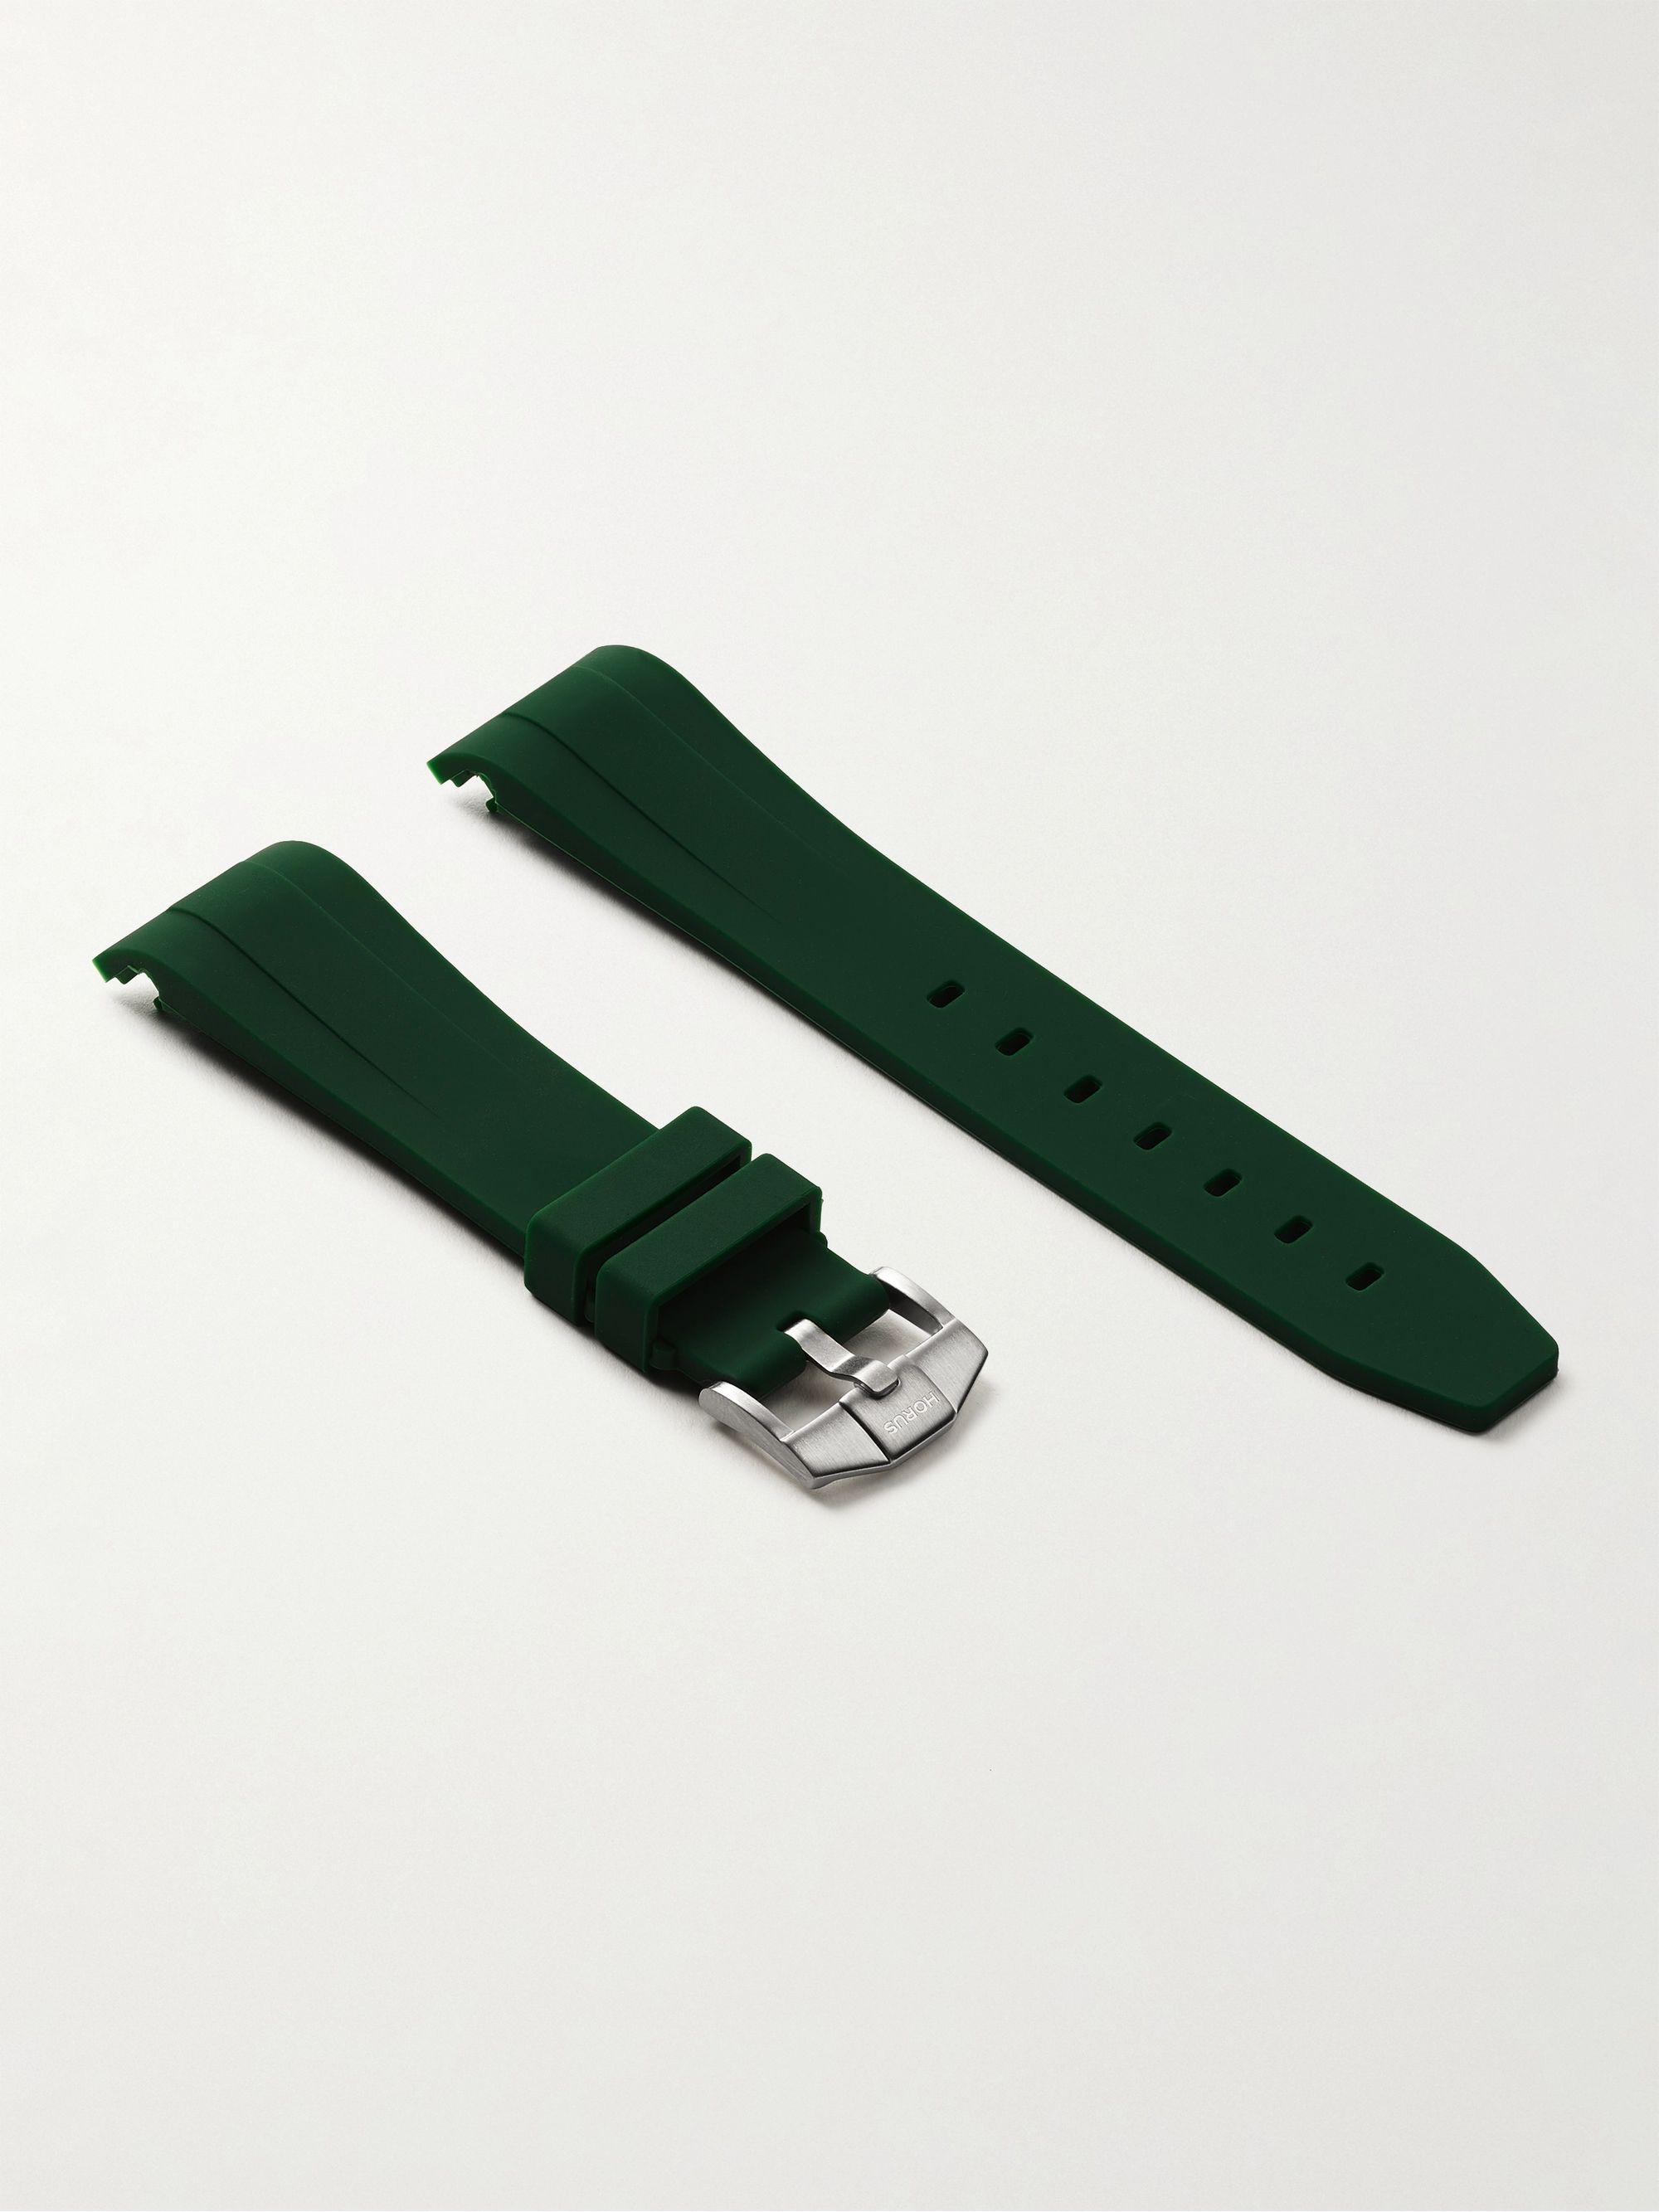 HORUS WATCH STRAPS 21mm Rubber Integrated Watch Strap for Men | MR PORTER